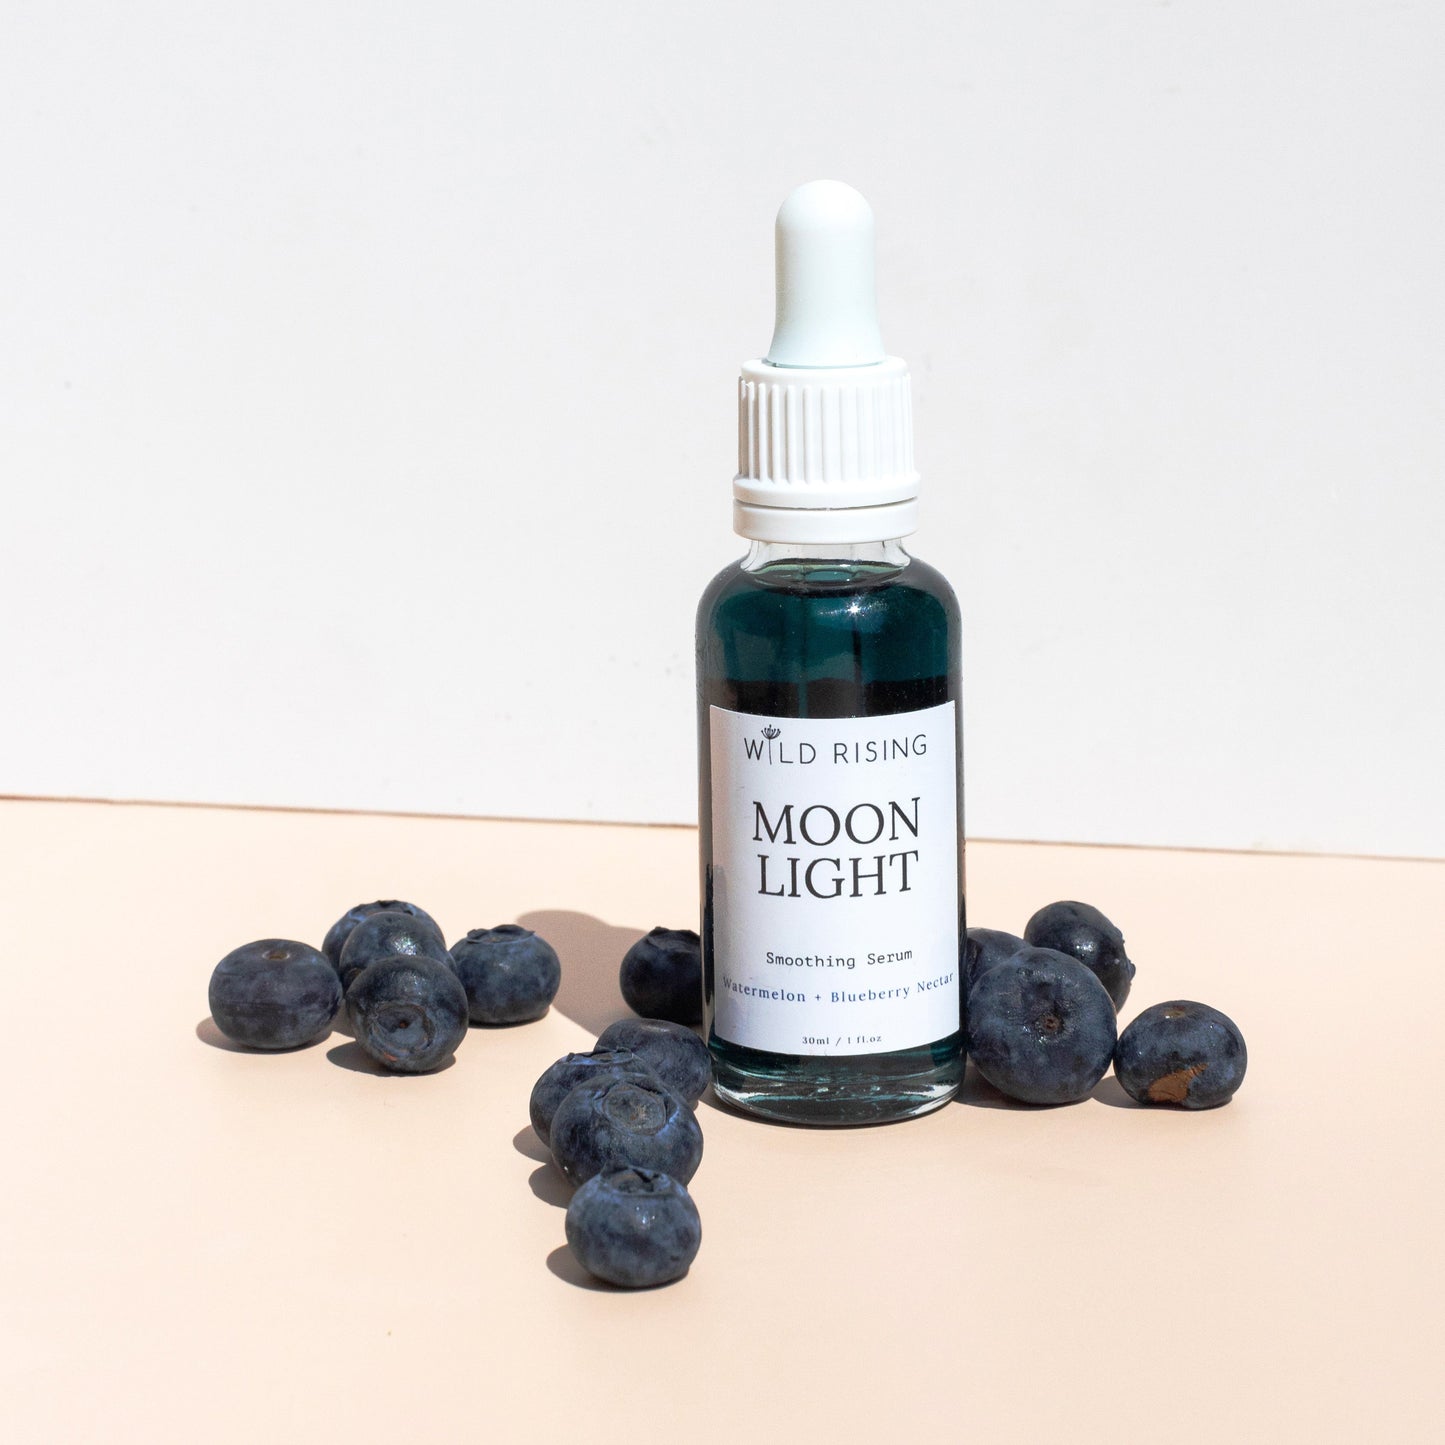 Moonlight smoothing serum with blueberry